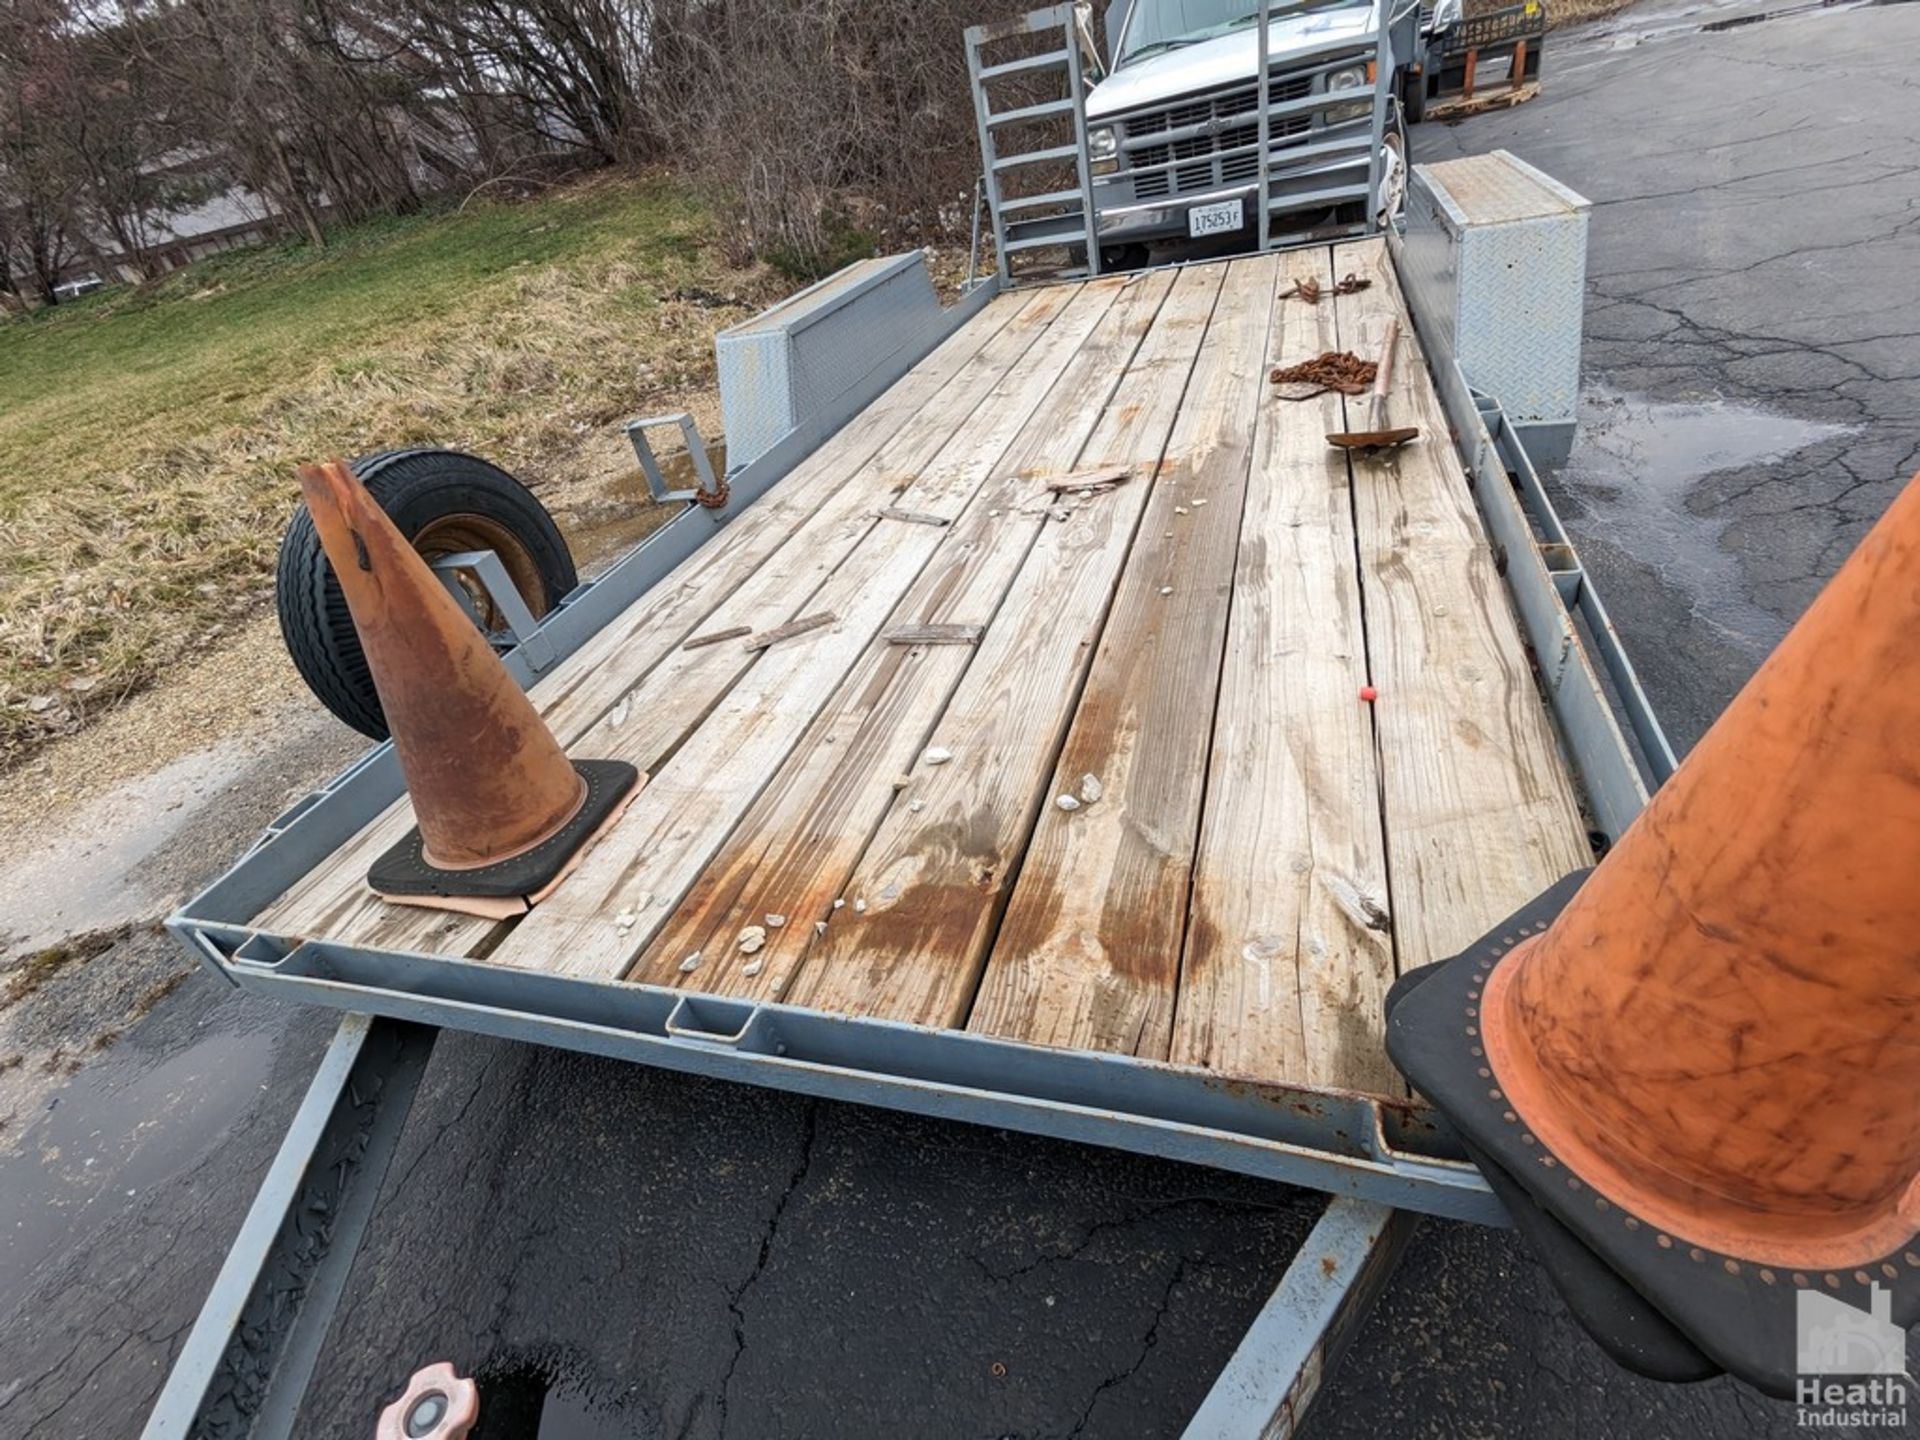 TANDEM AXLE UTILITY TRAILER, 16' X 79" WOOD DECK PINTLE HITCH, 4' RAMPS - Image 3 of 7